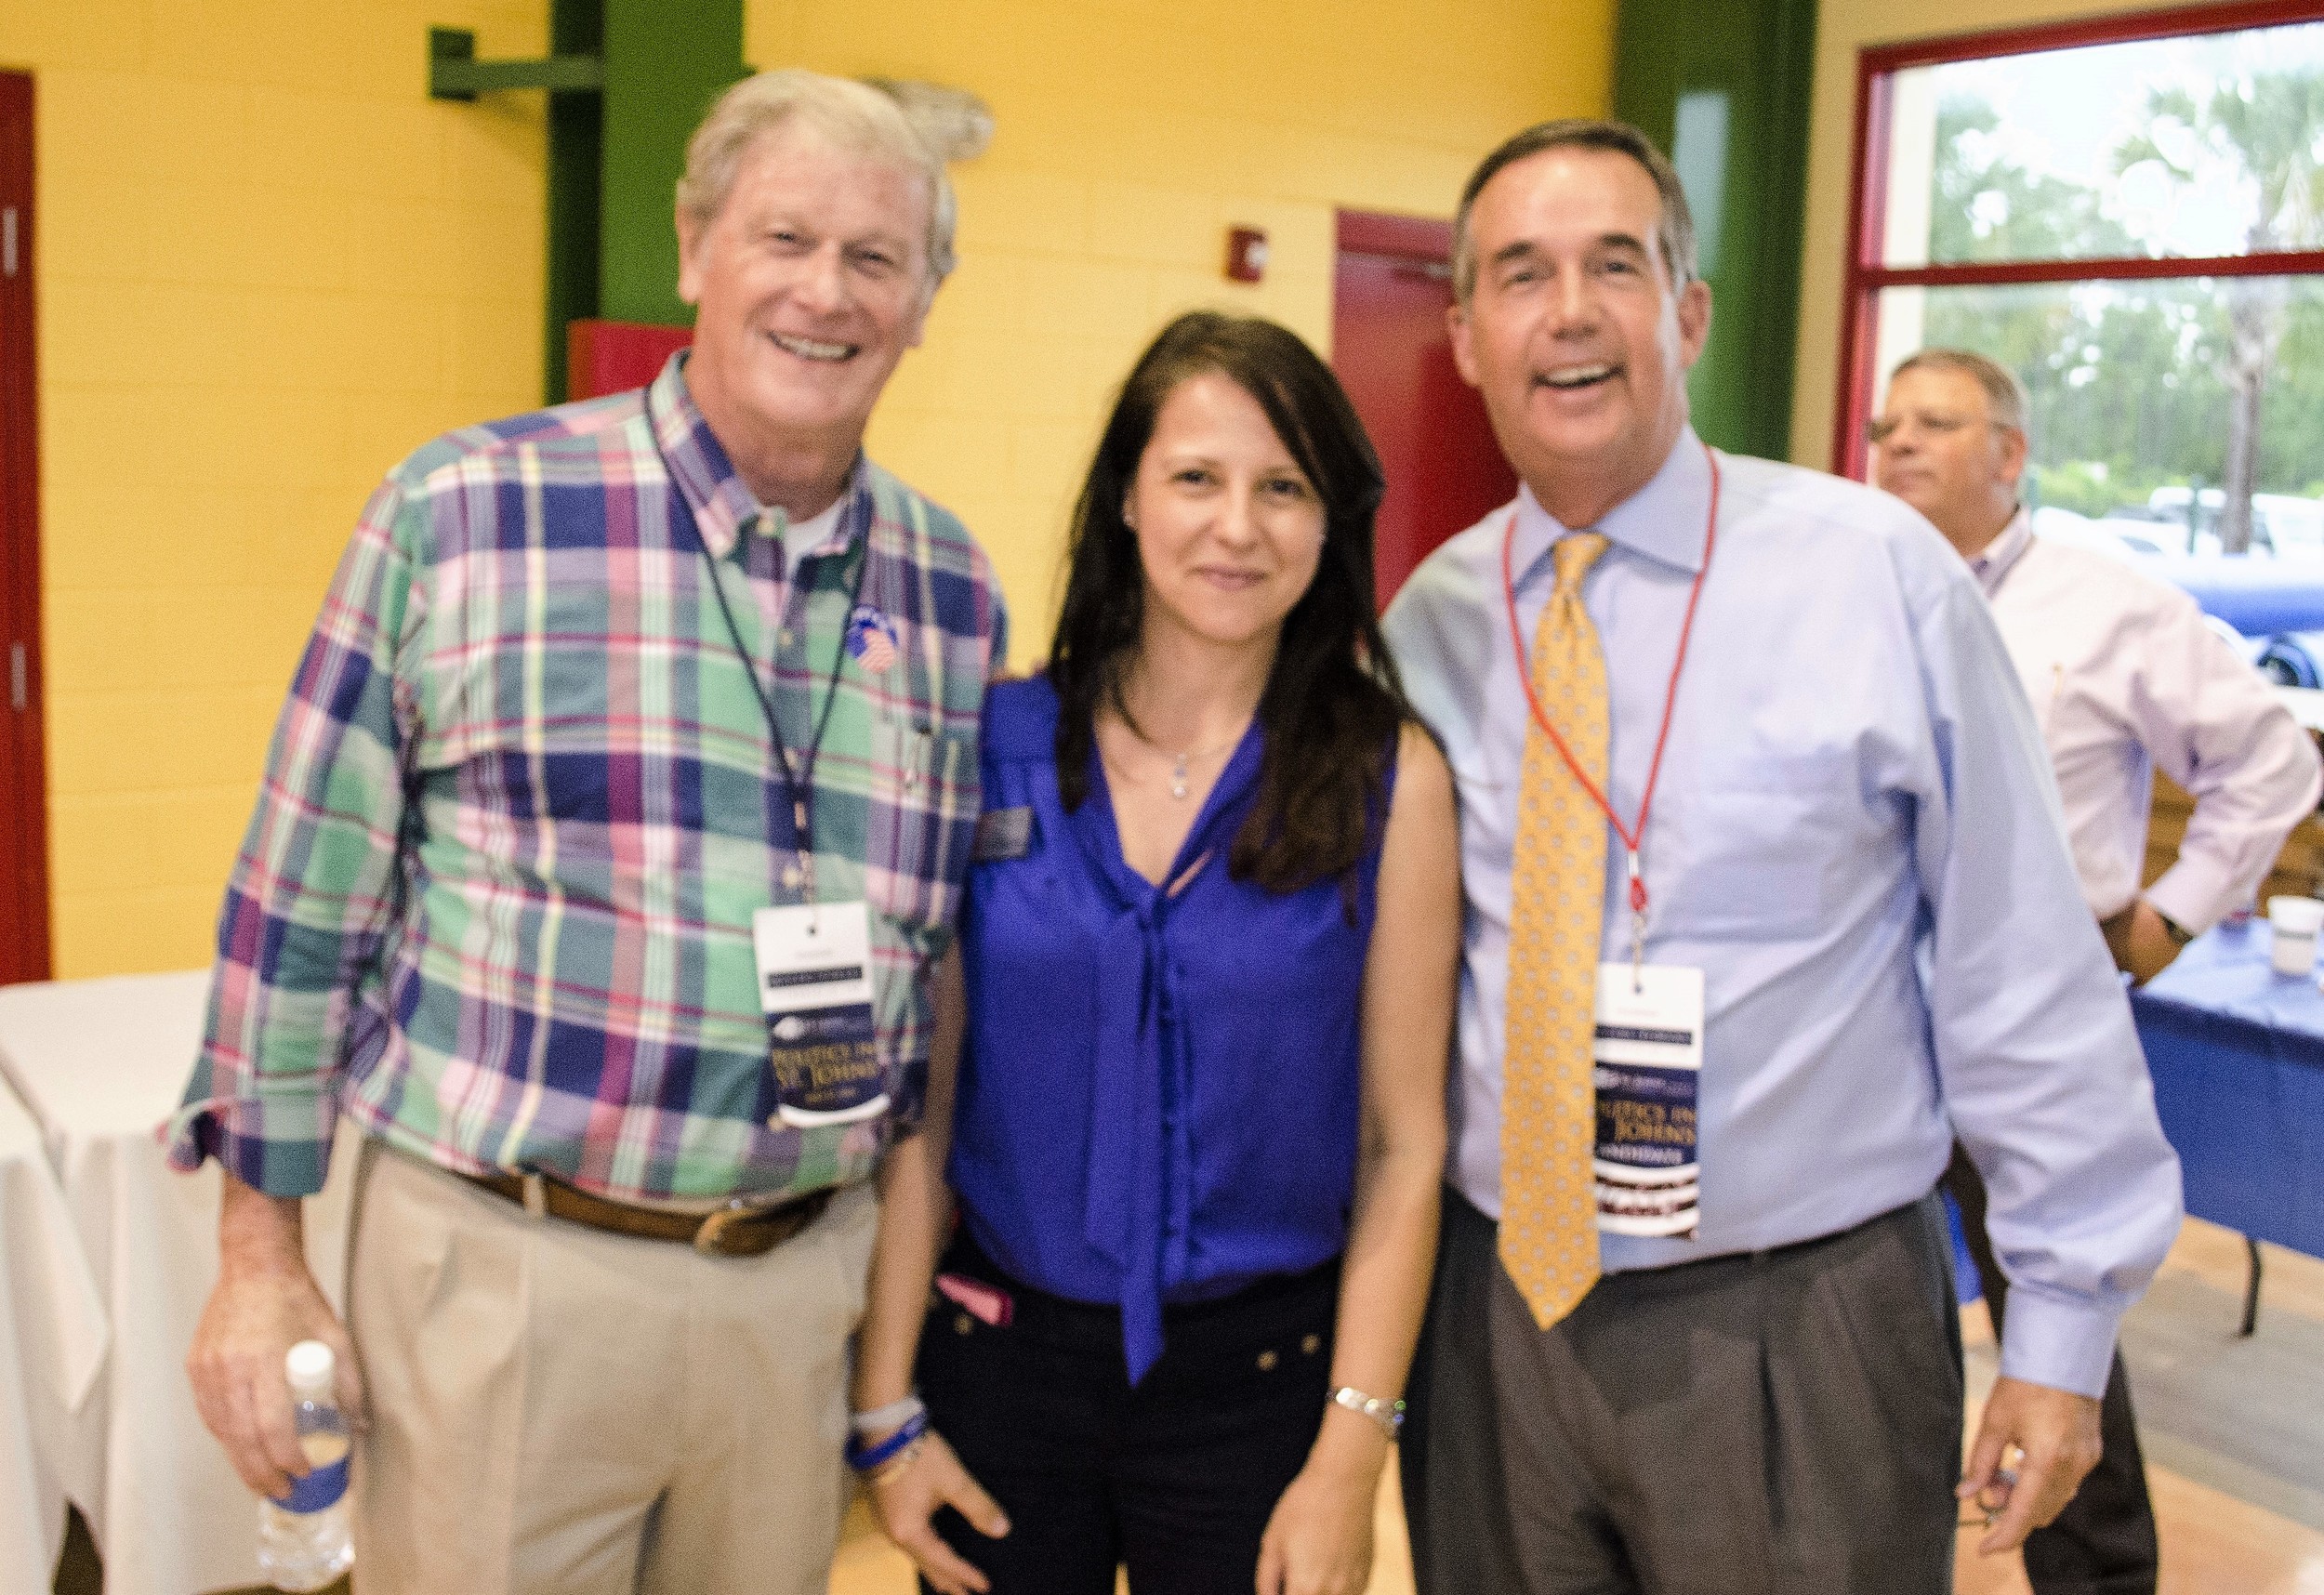 Chamber President and CEO Isabelle Rodriguez (center) joins former state senator and current Florida State University President John Thrasher (left) and Florida Chief Financial Officer Jeff Atwater (right) at a previous Politics in St. Johns event.